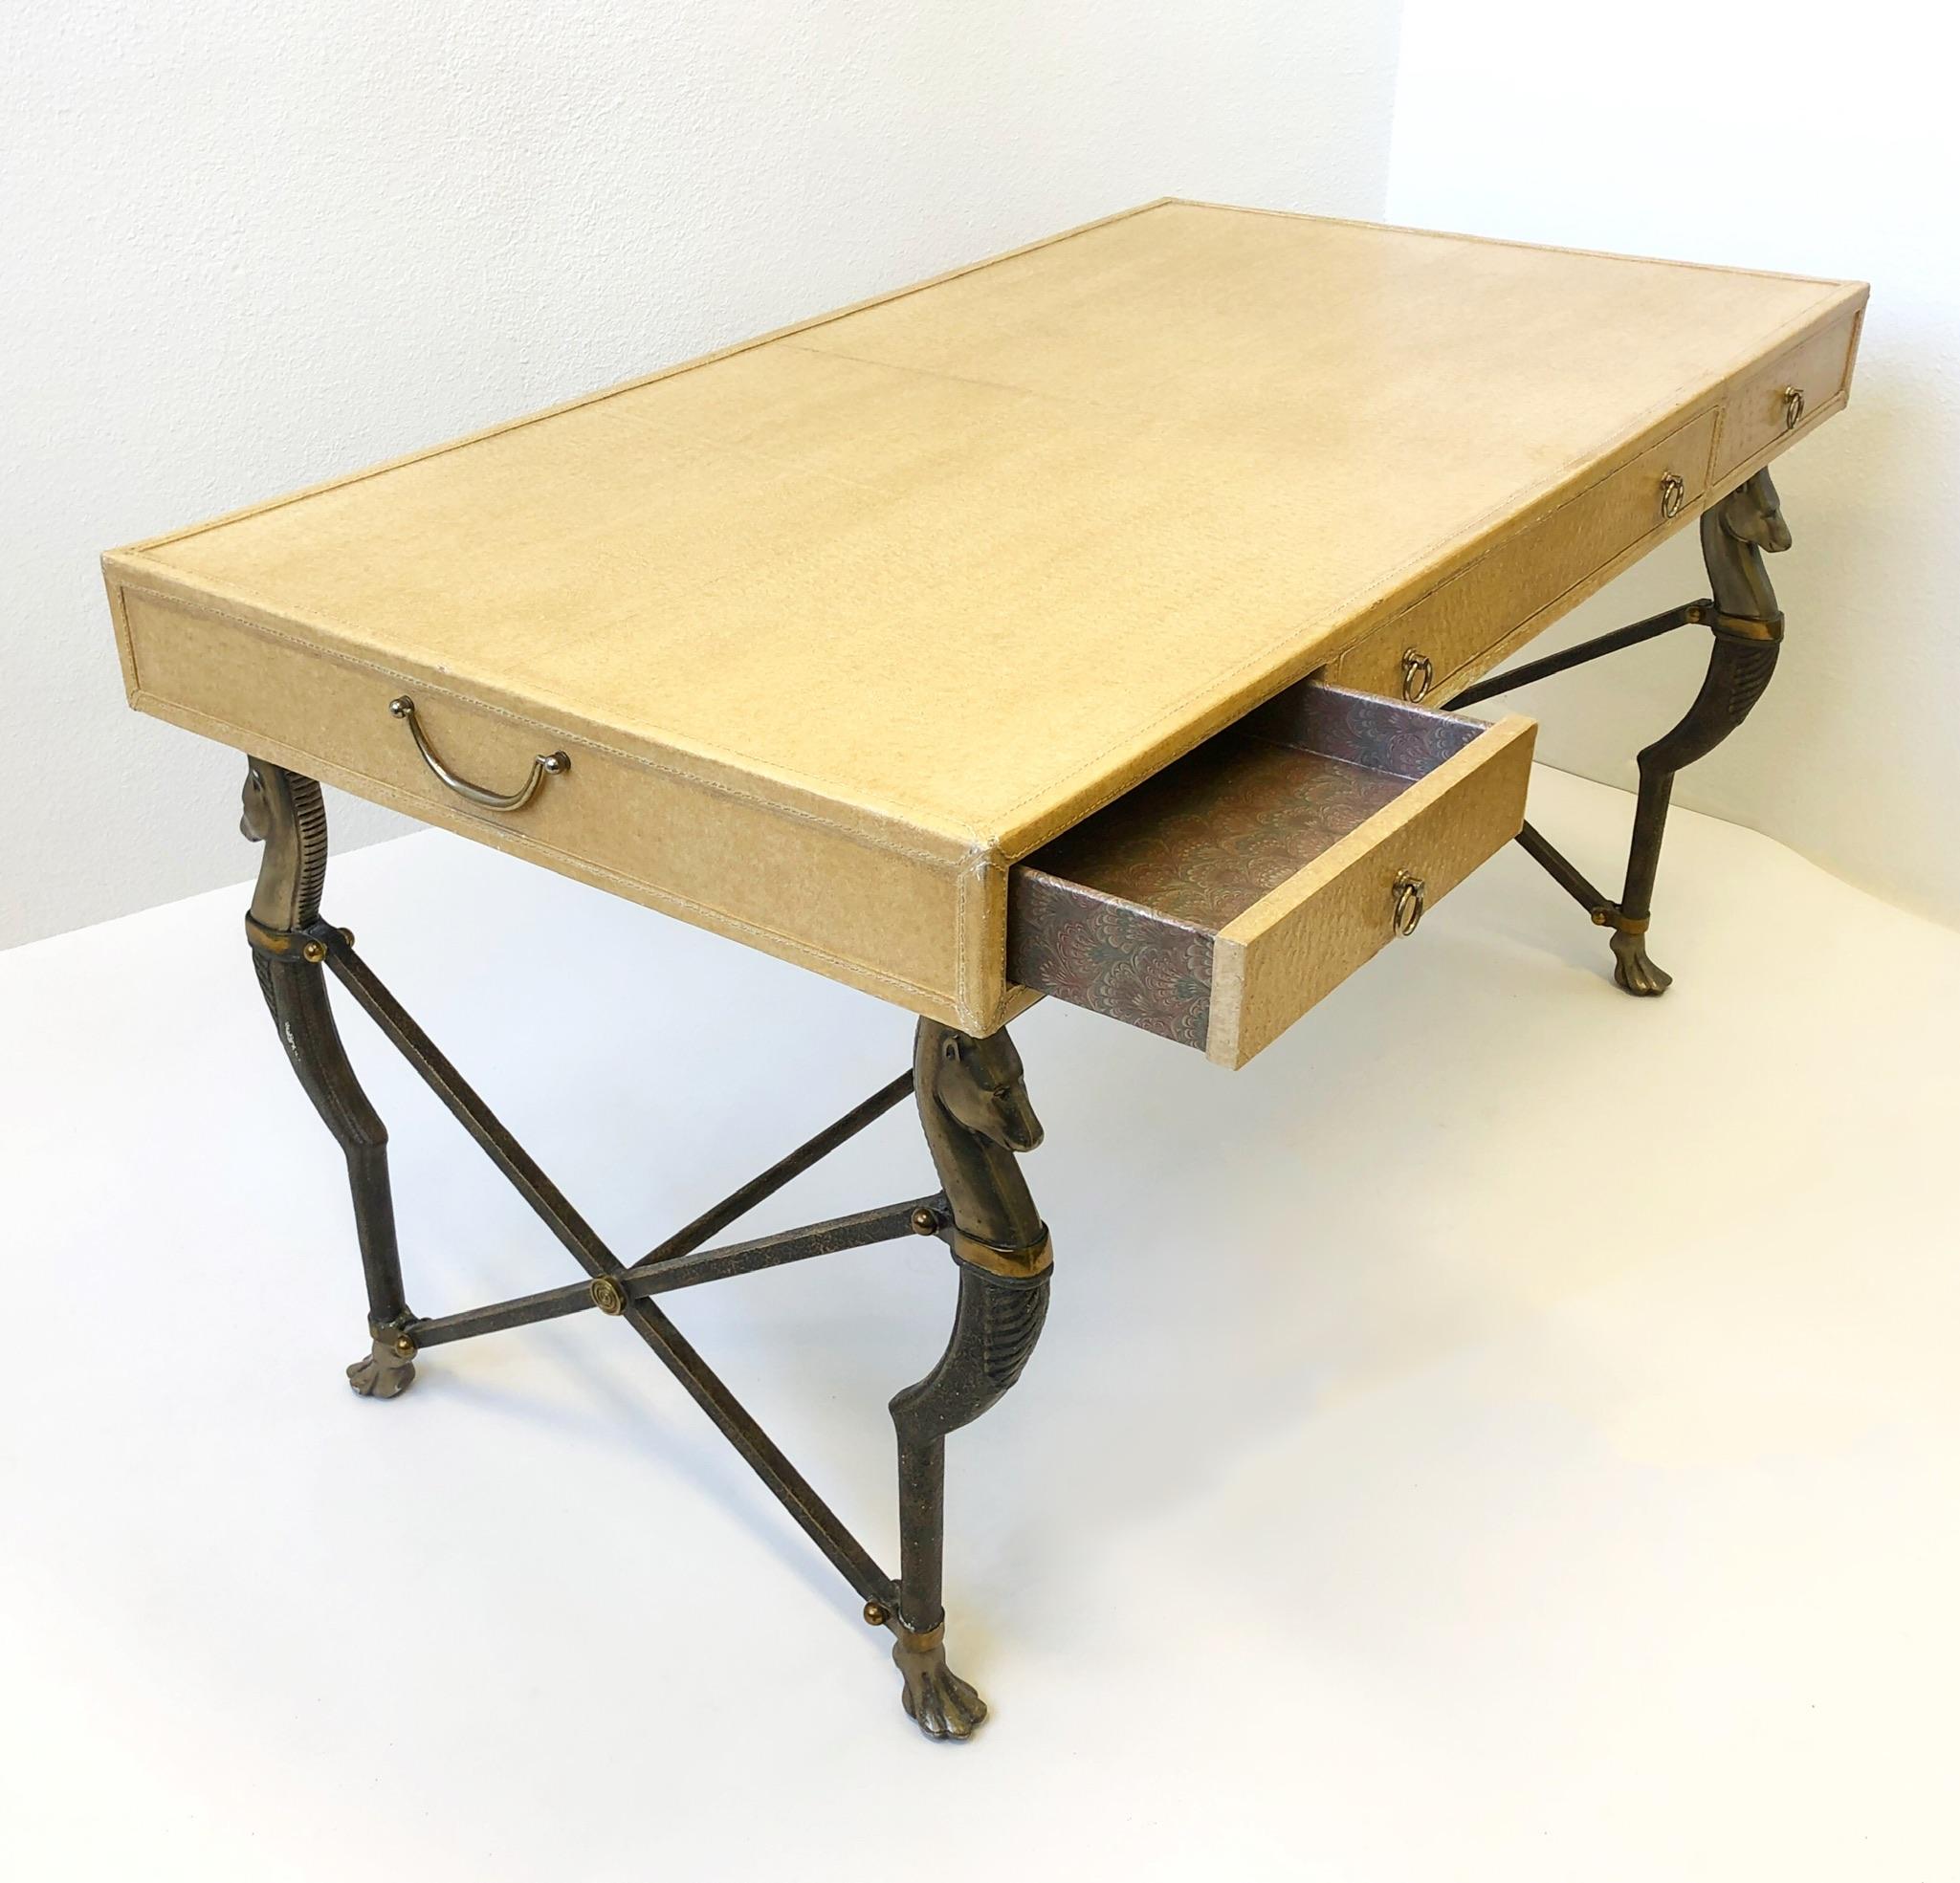 Glamorous three drawer Campaign desk designer by Marge Carson in 1999.
The desk top is covered with faux ostrich embossed leather and the four horse leg frame is constructed of aluminum with brass details. 
In great condition with minor wear